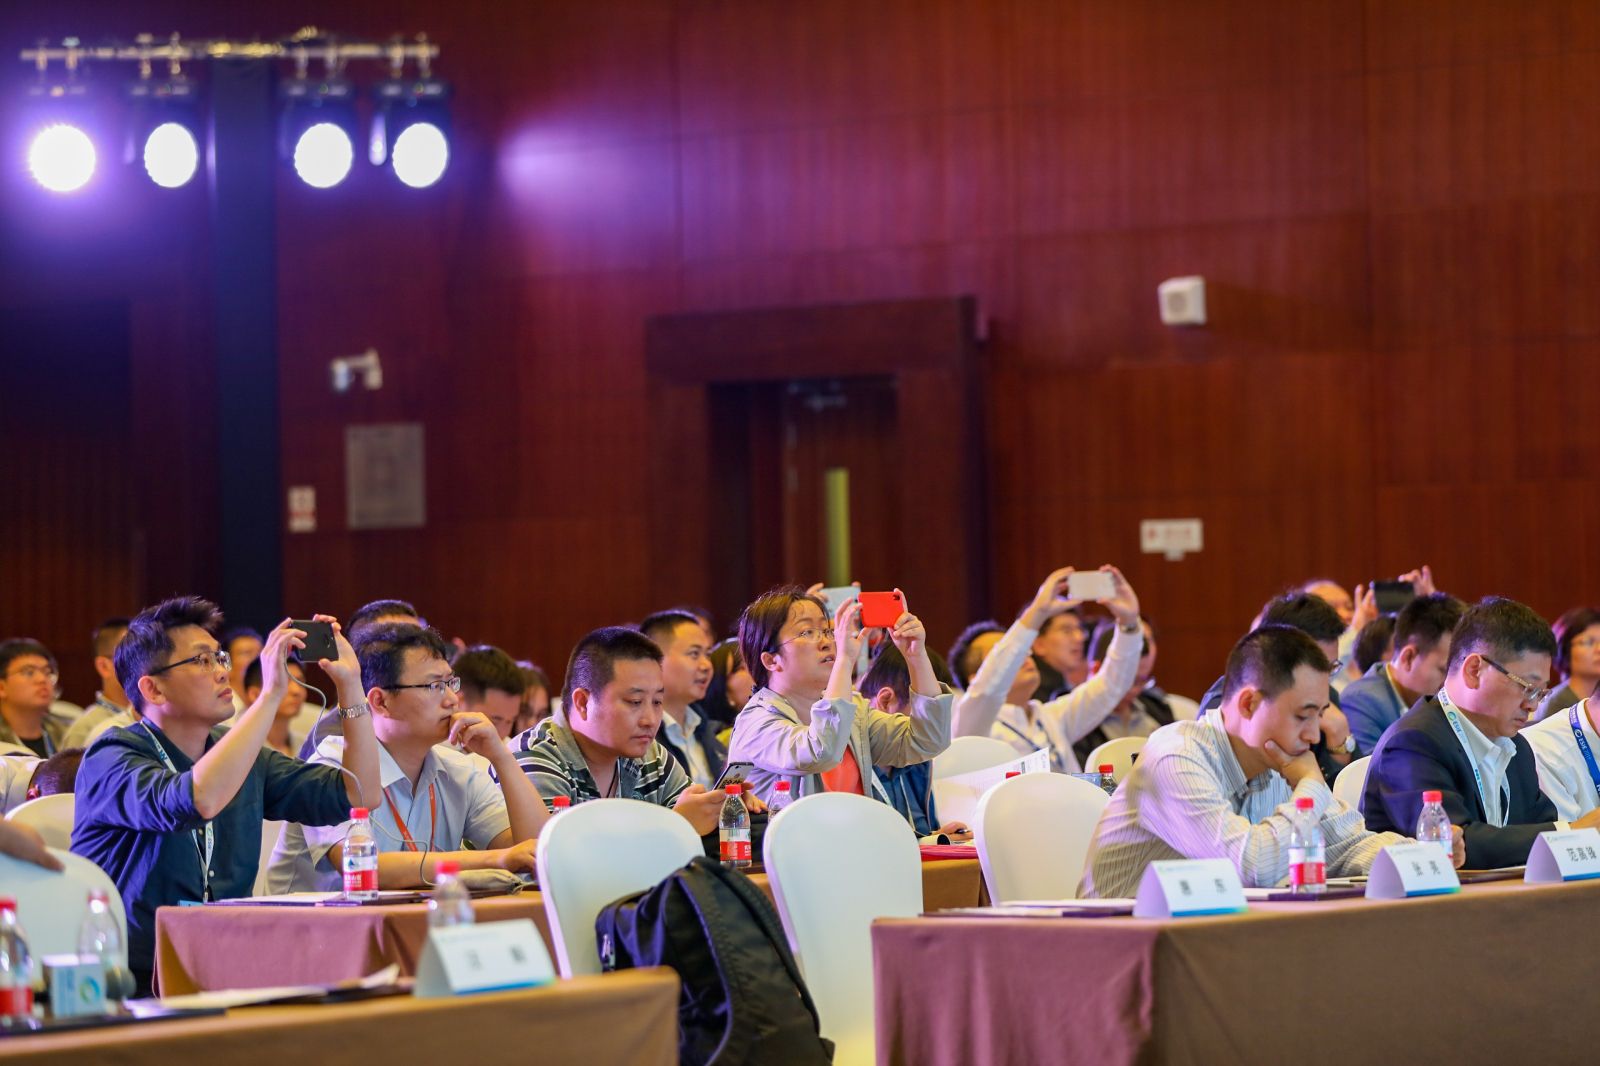 Audience at the Forum “Global Energy Storage System Safety & Standardization”, ©CNESA